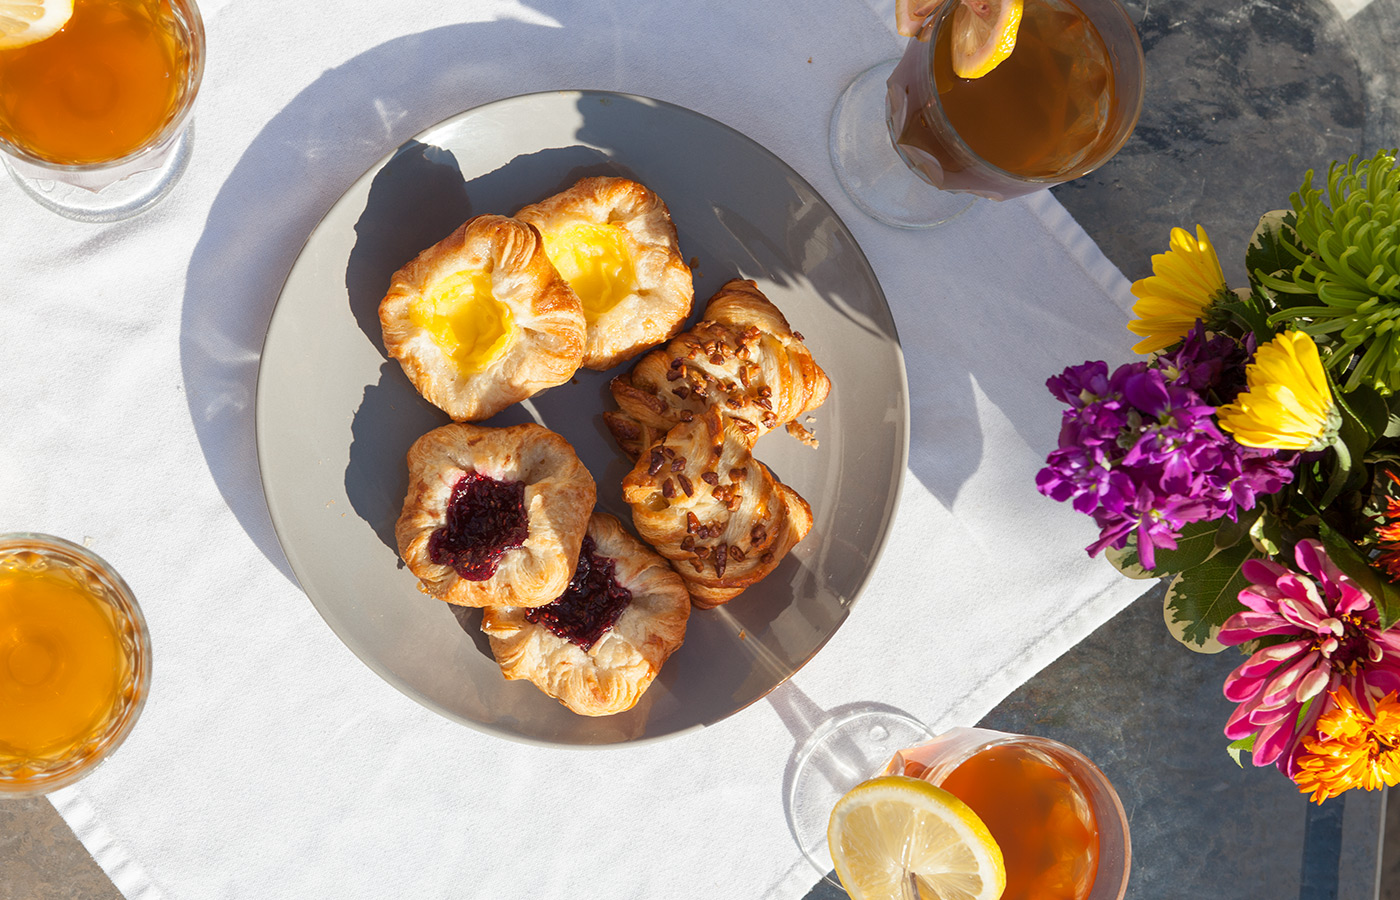 A plate of pastries and drinks.